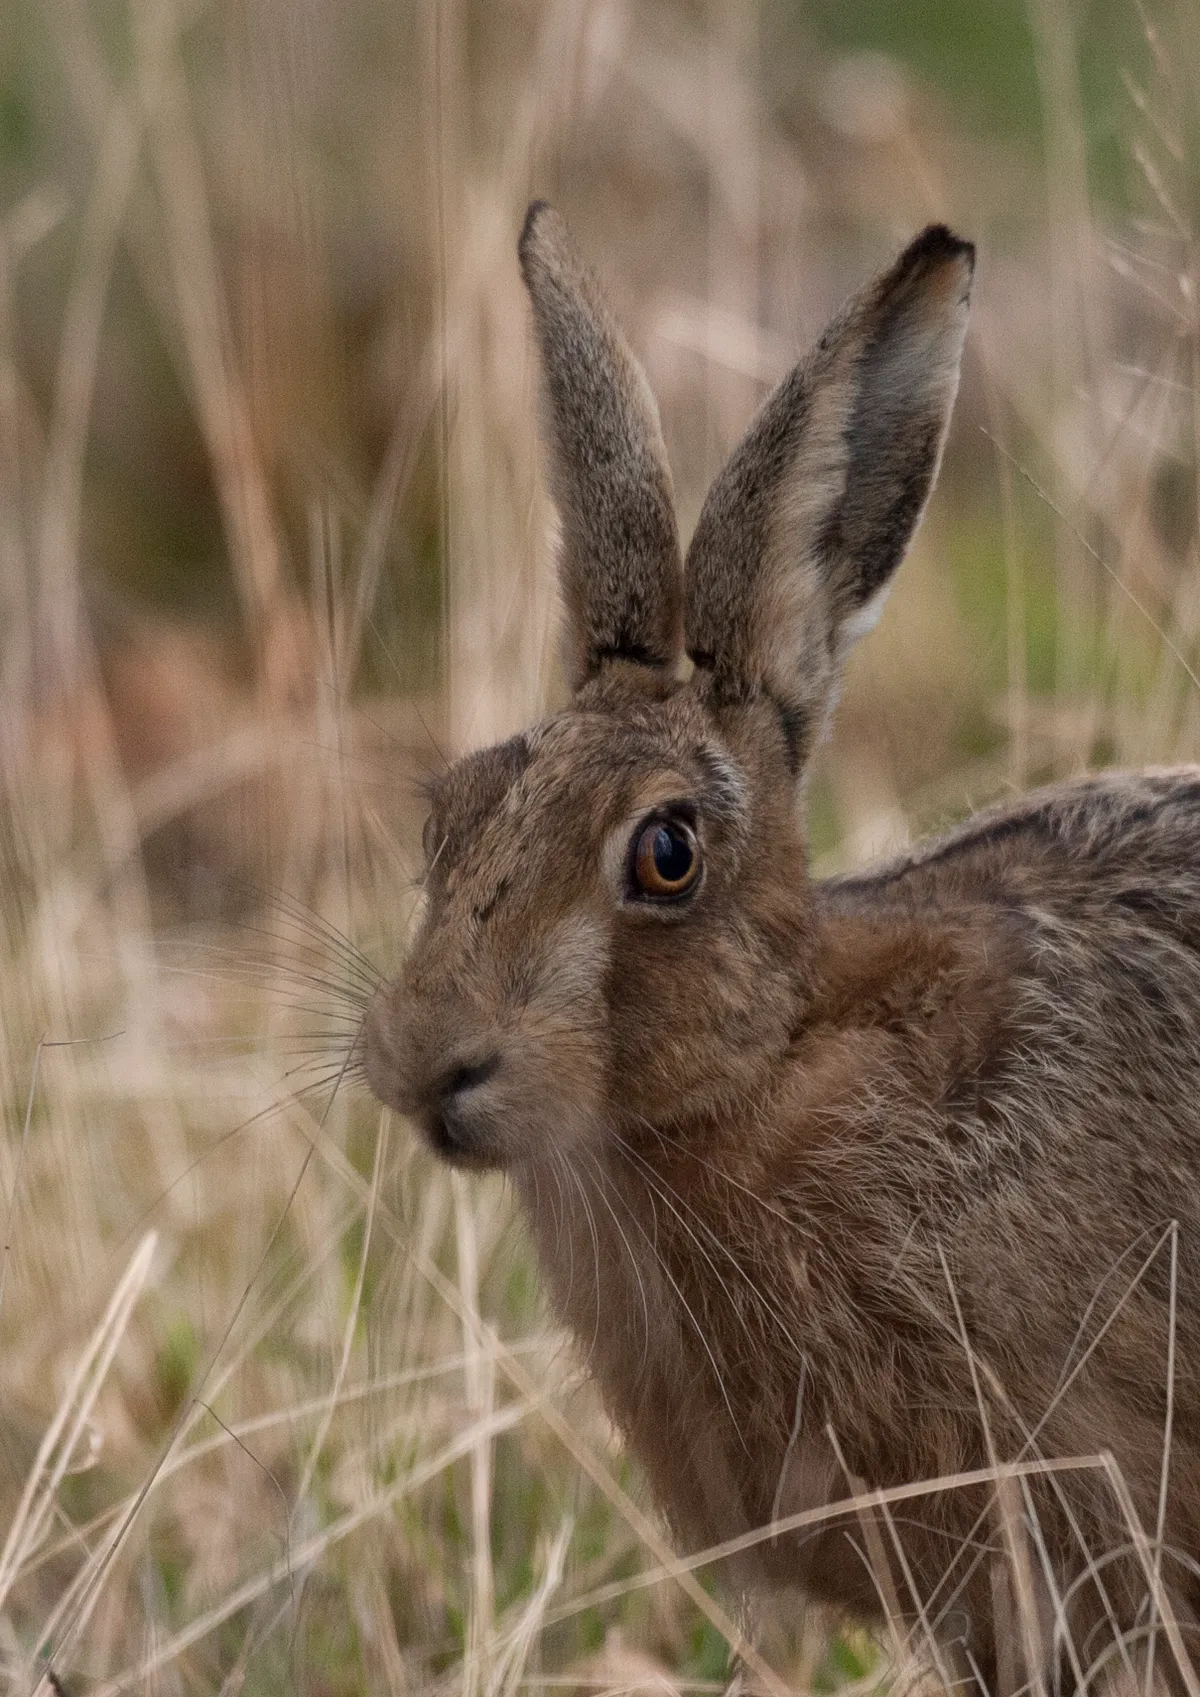 Hares are normally quite wary animals, but they become much braver during the boxing season. This hare came very close to David in the Brecon Beacons, allowing such a close up shot of its lovely facial markings. © David Bailey.